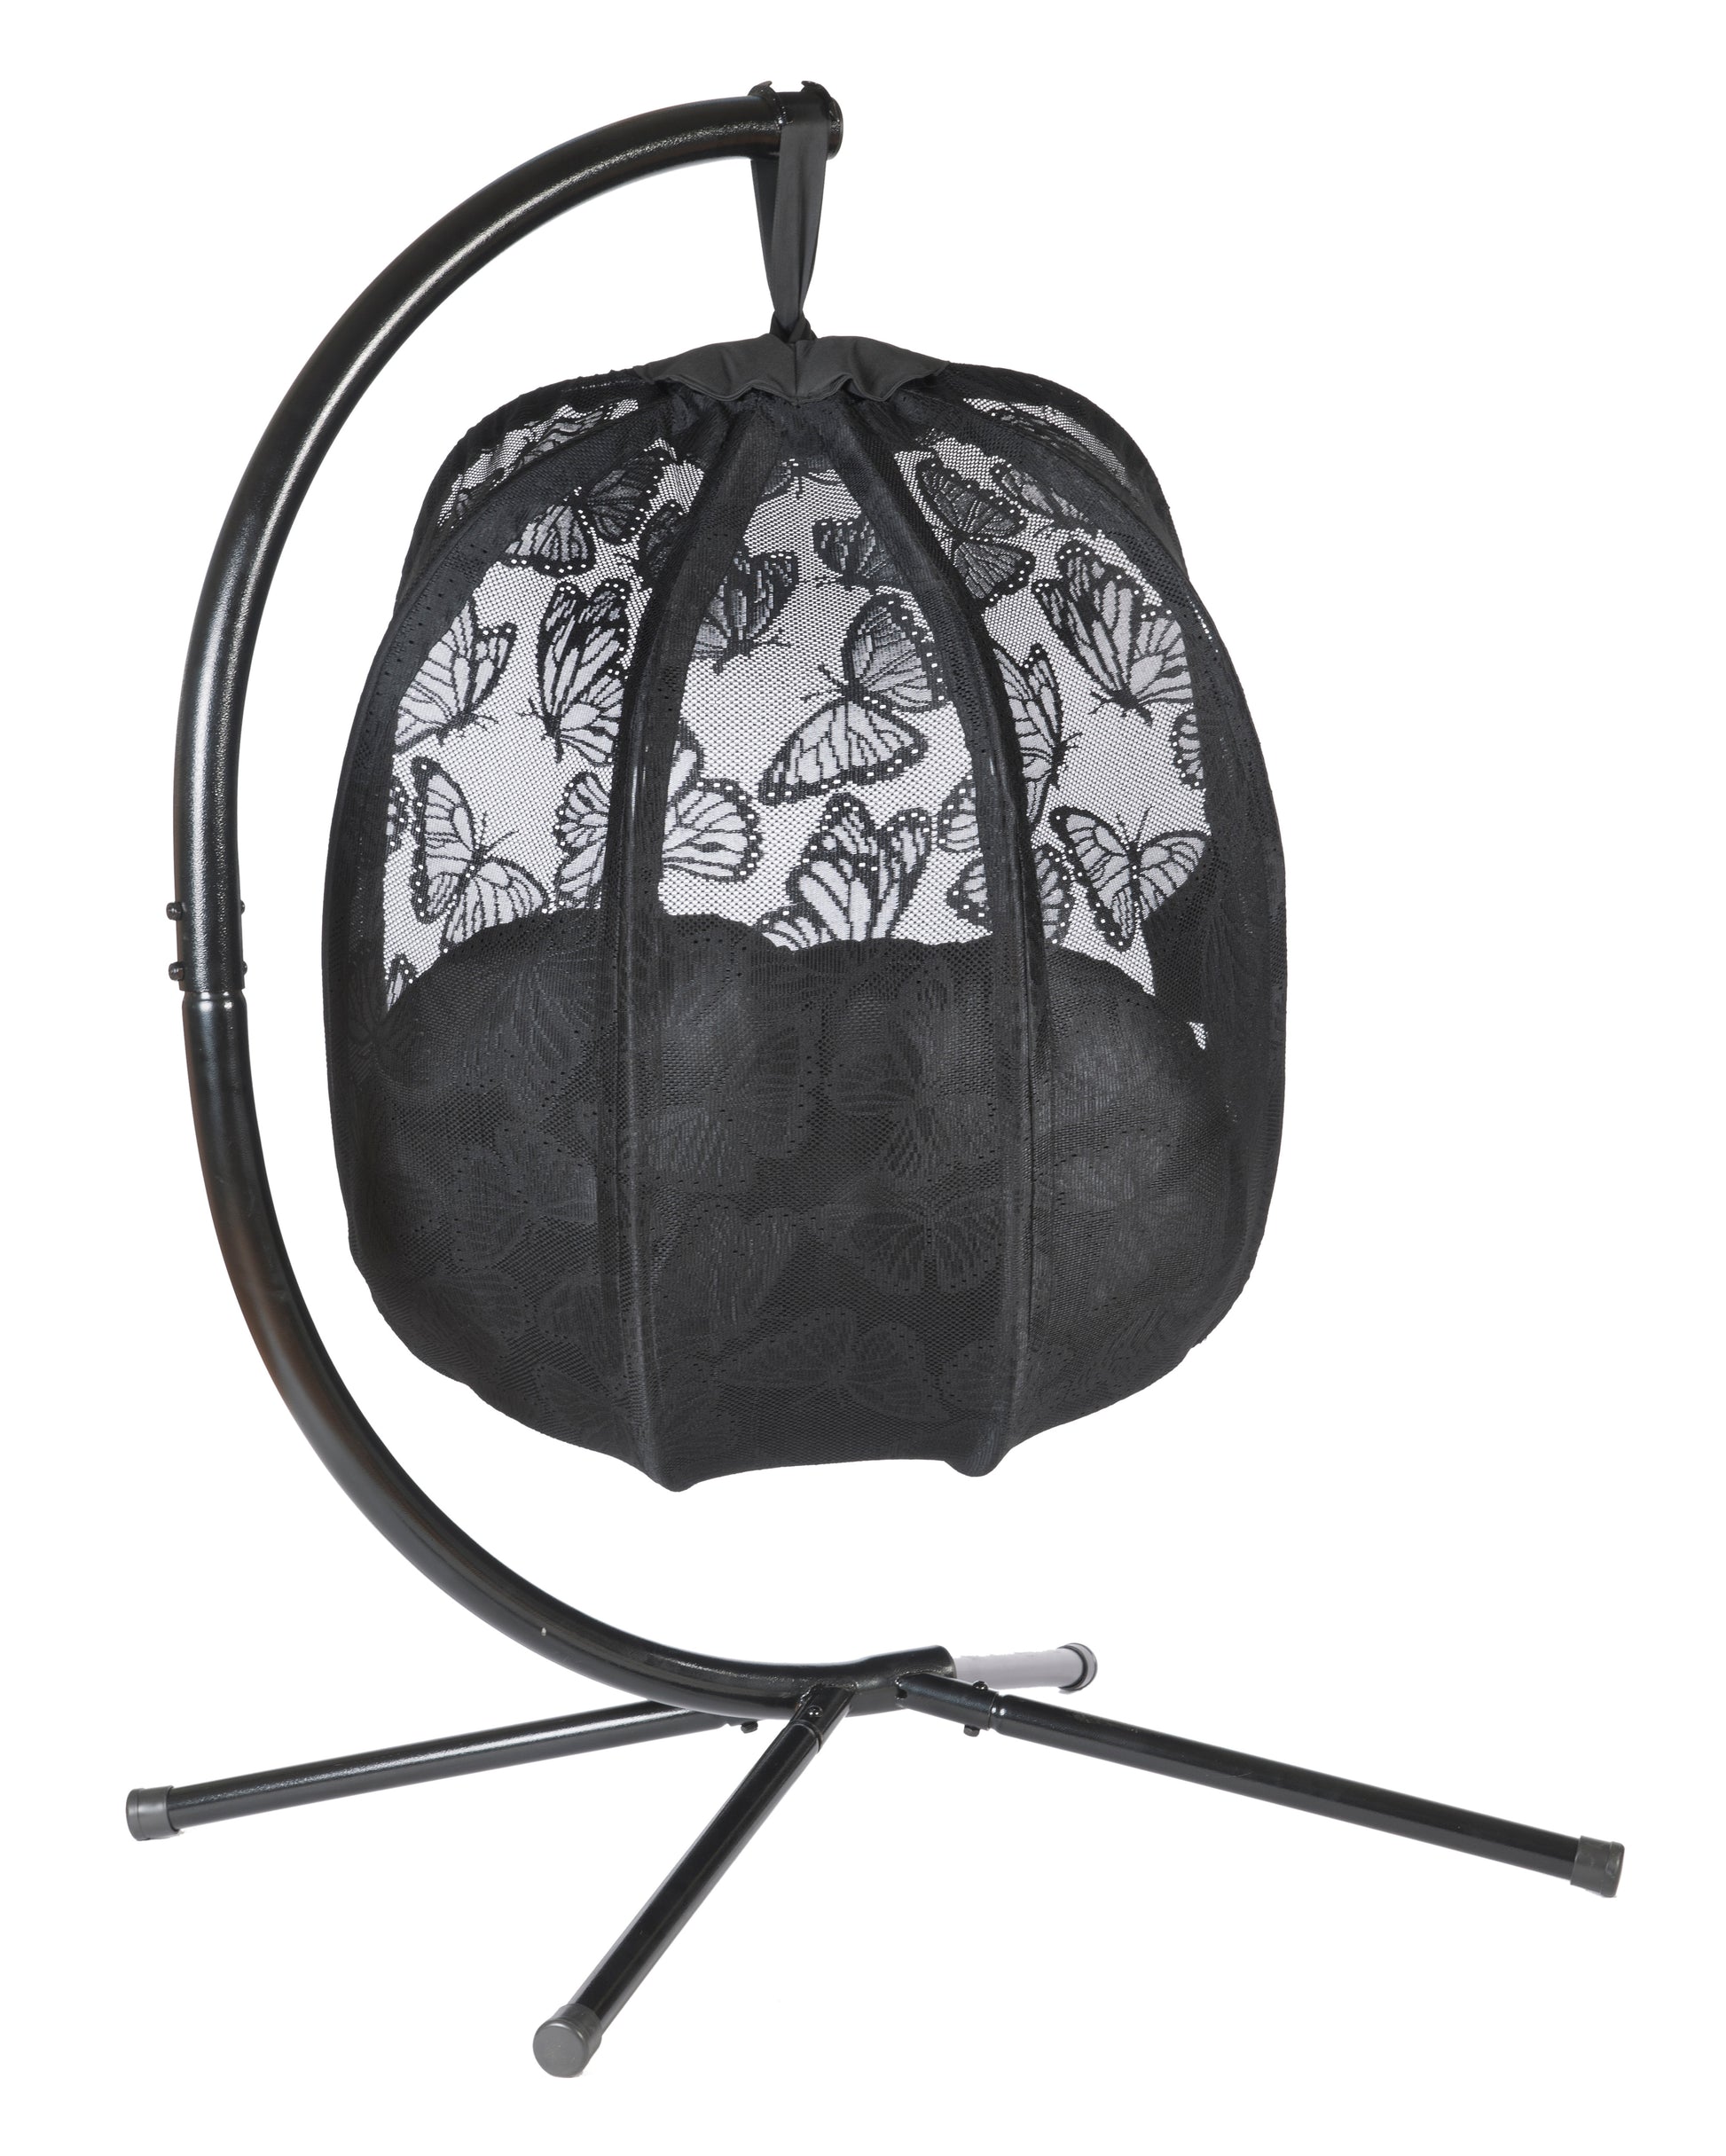 FlowerHouse Hanging Egg Chair - Butterfly - back view